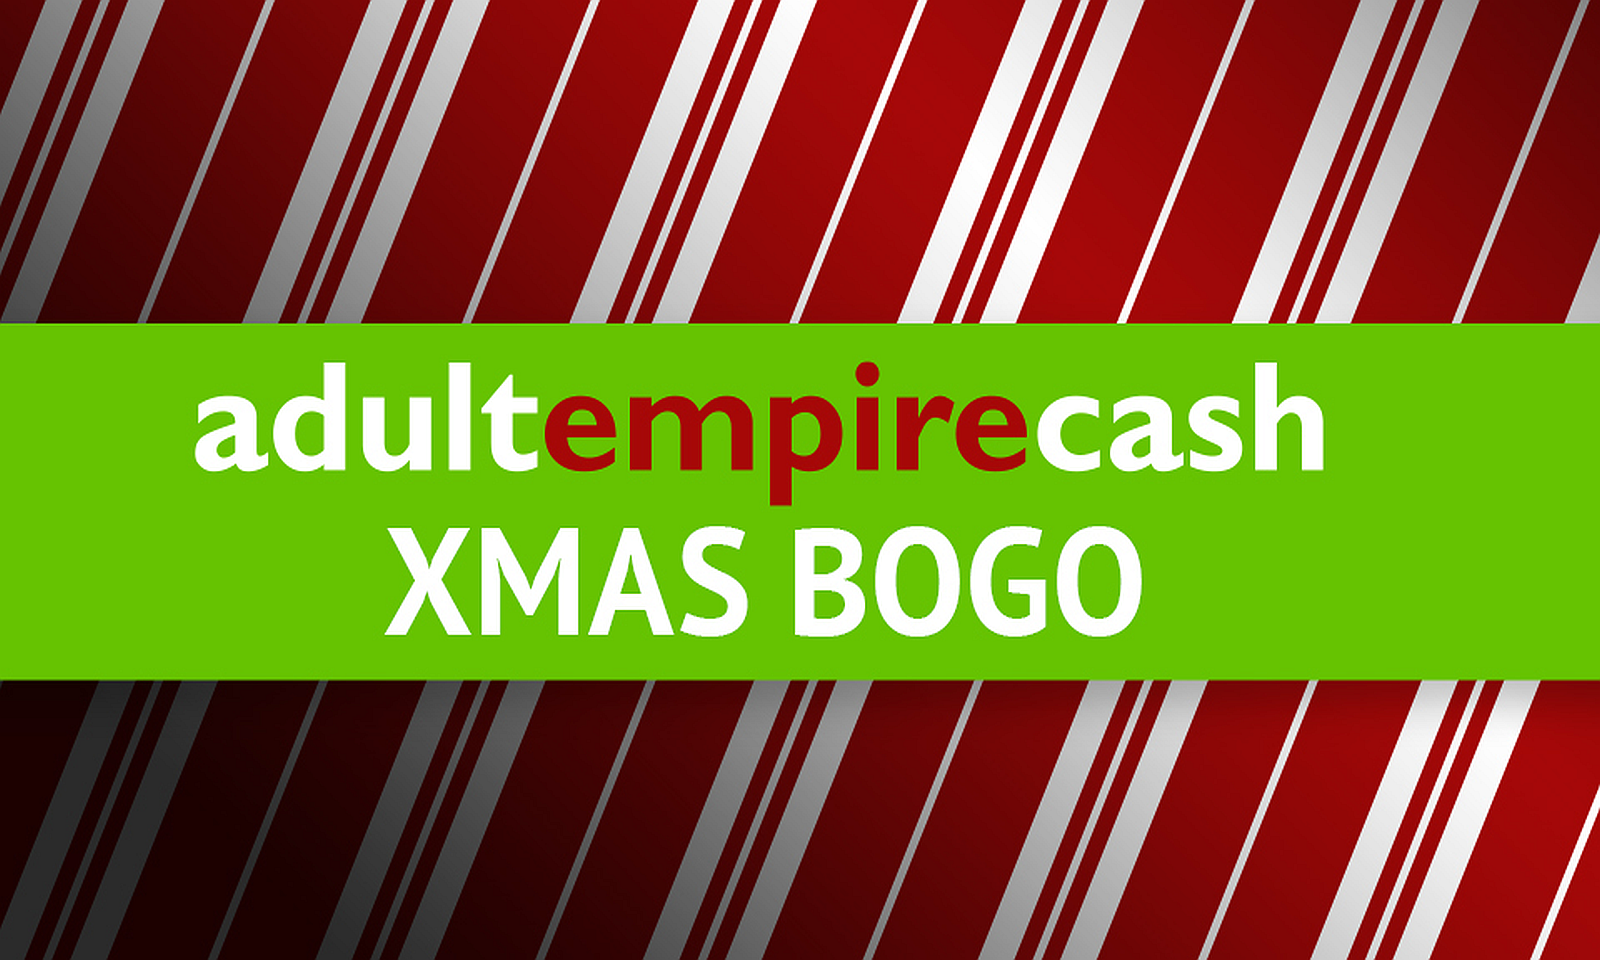 Deck the Halls with the Adult Empire Cash BOGO Holiday Sale